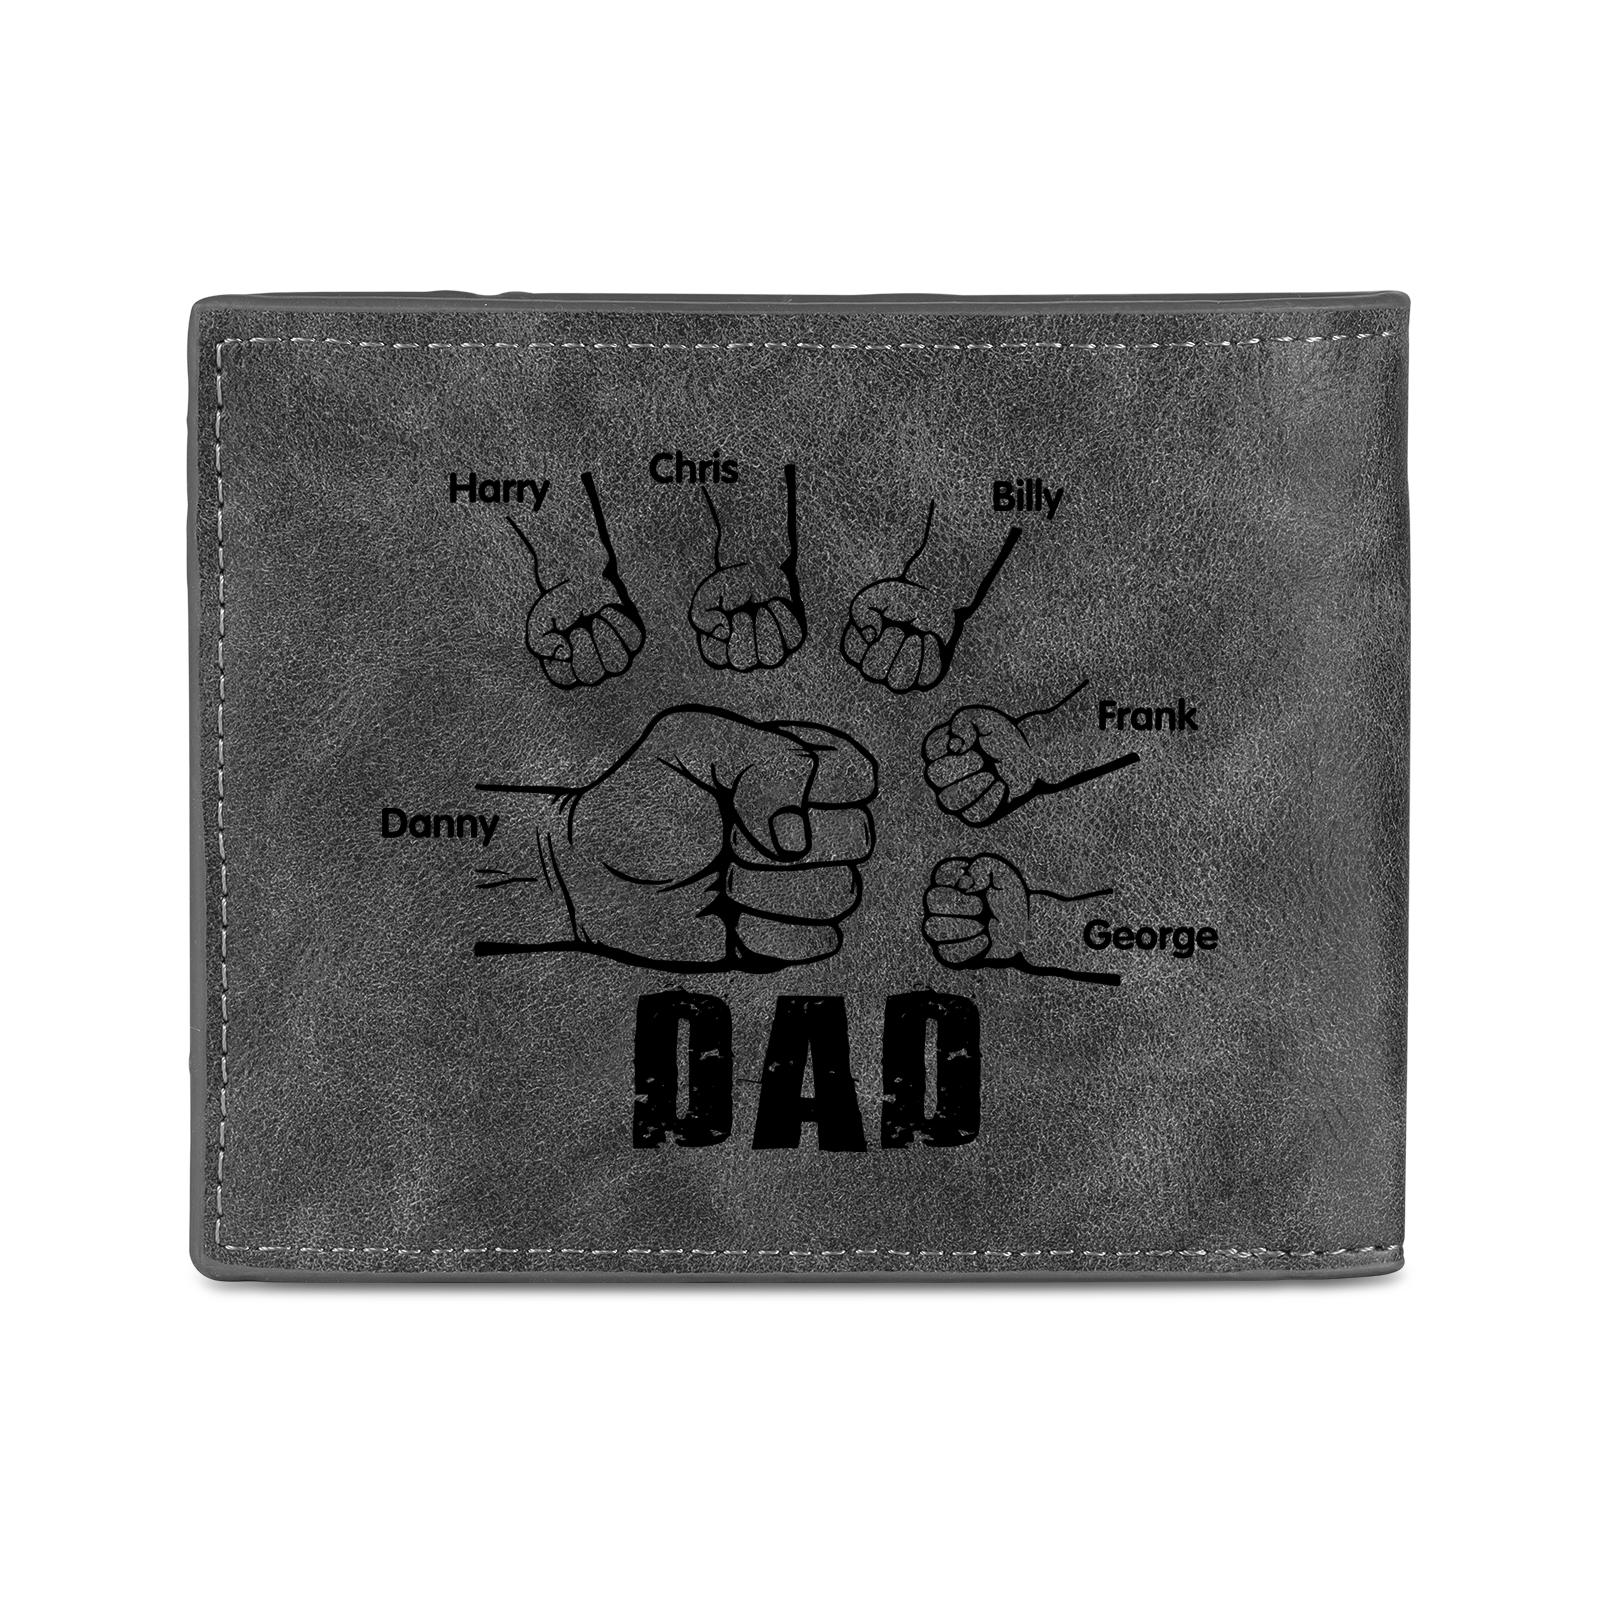 6 Names - Personalized Photo Custom Leather Men's Wallet as a Father's Day Gift for Dad